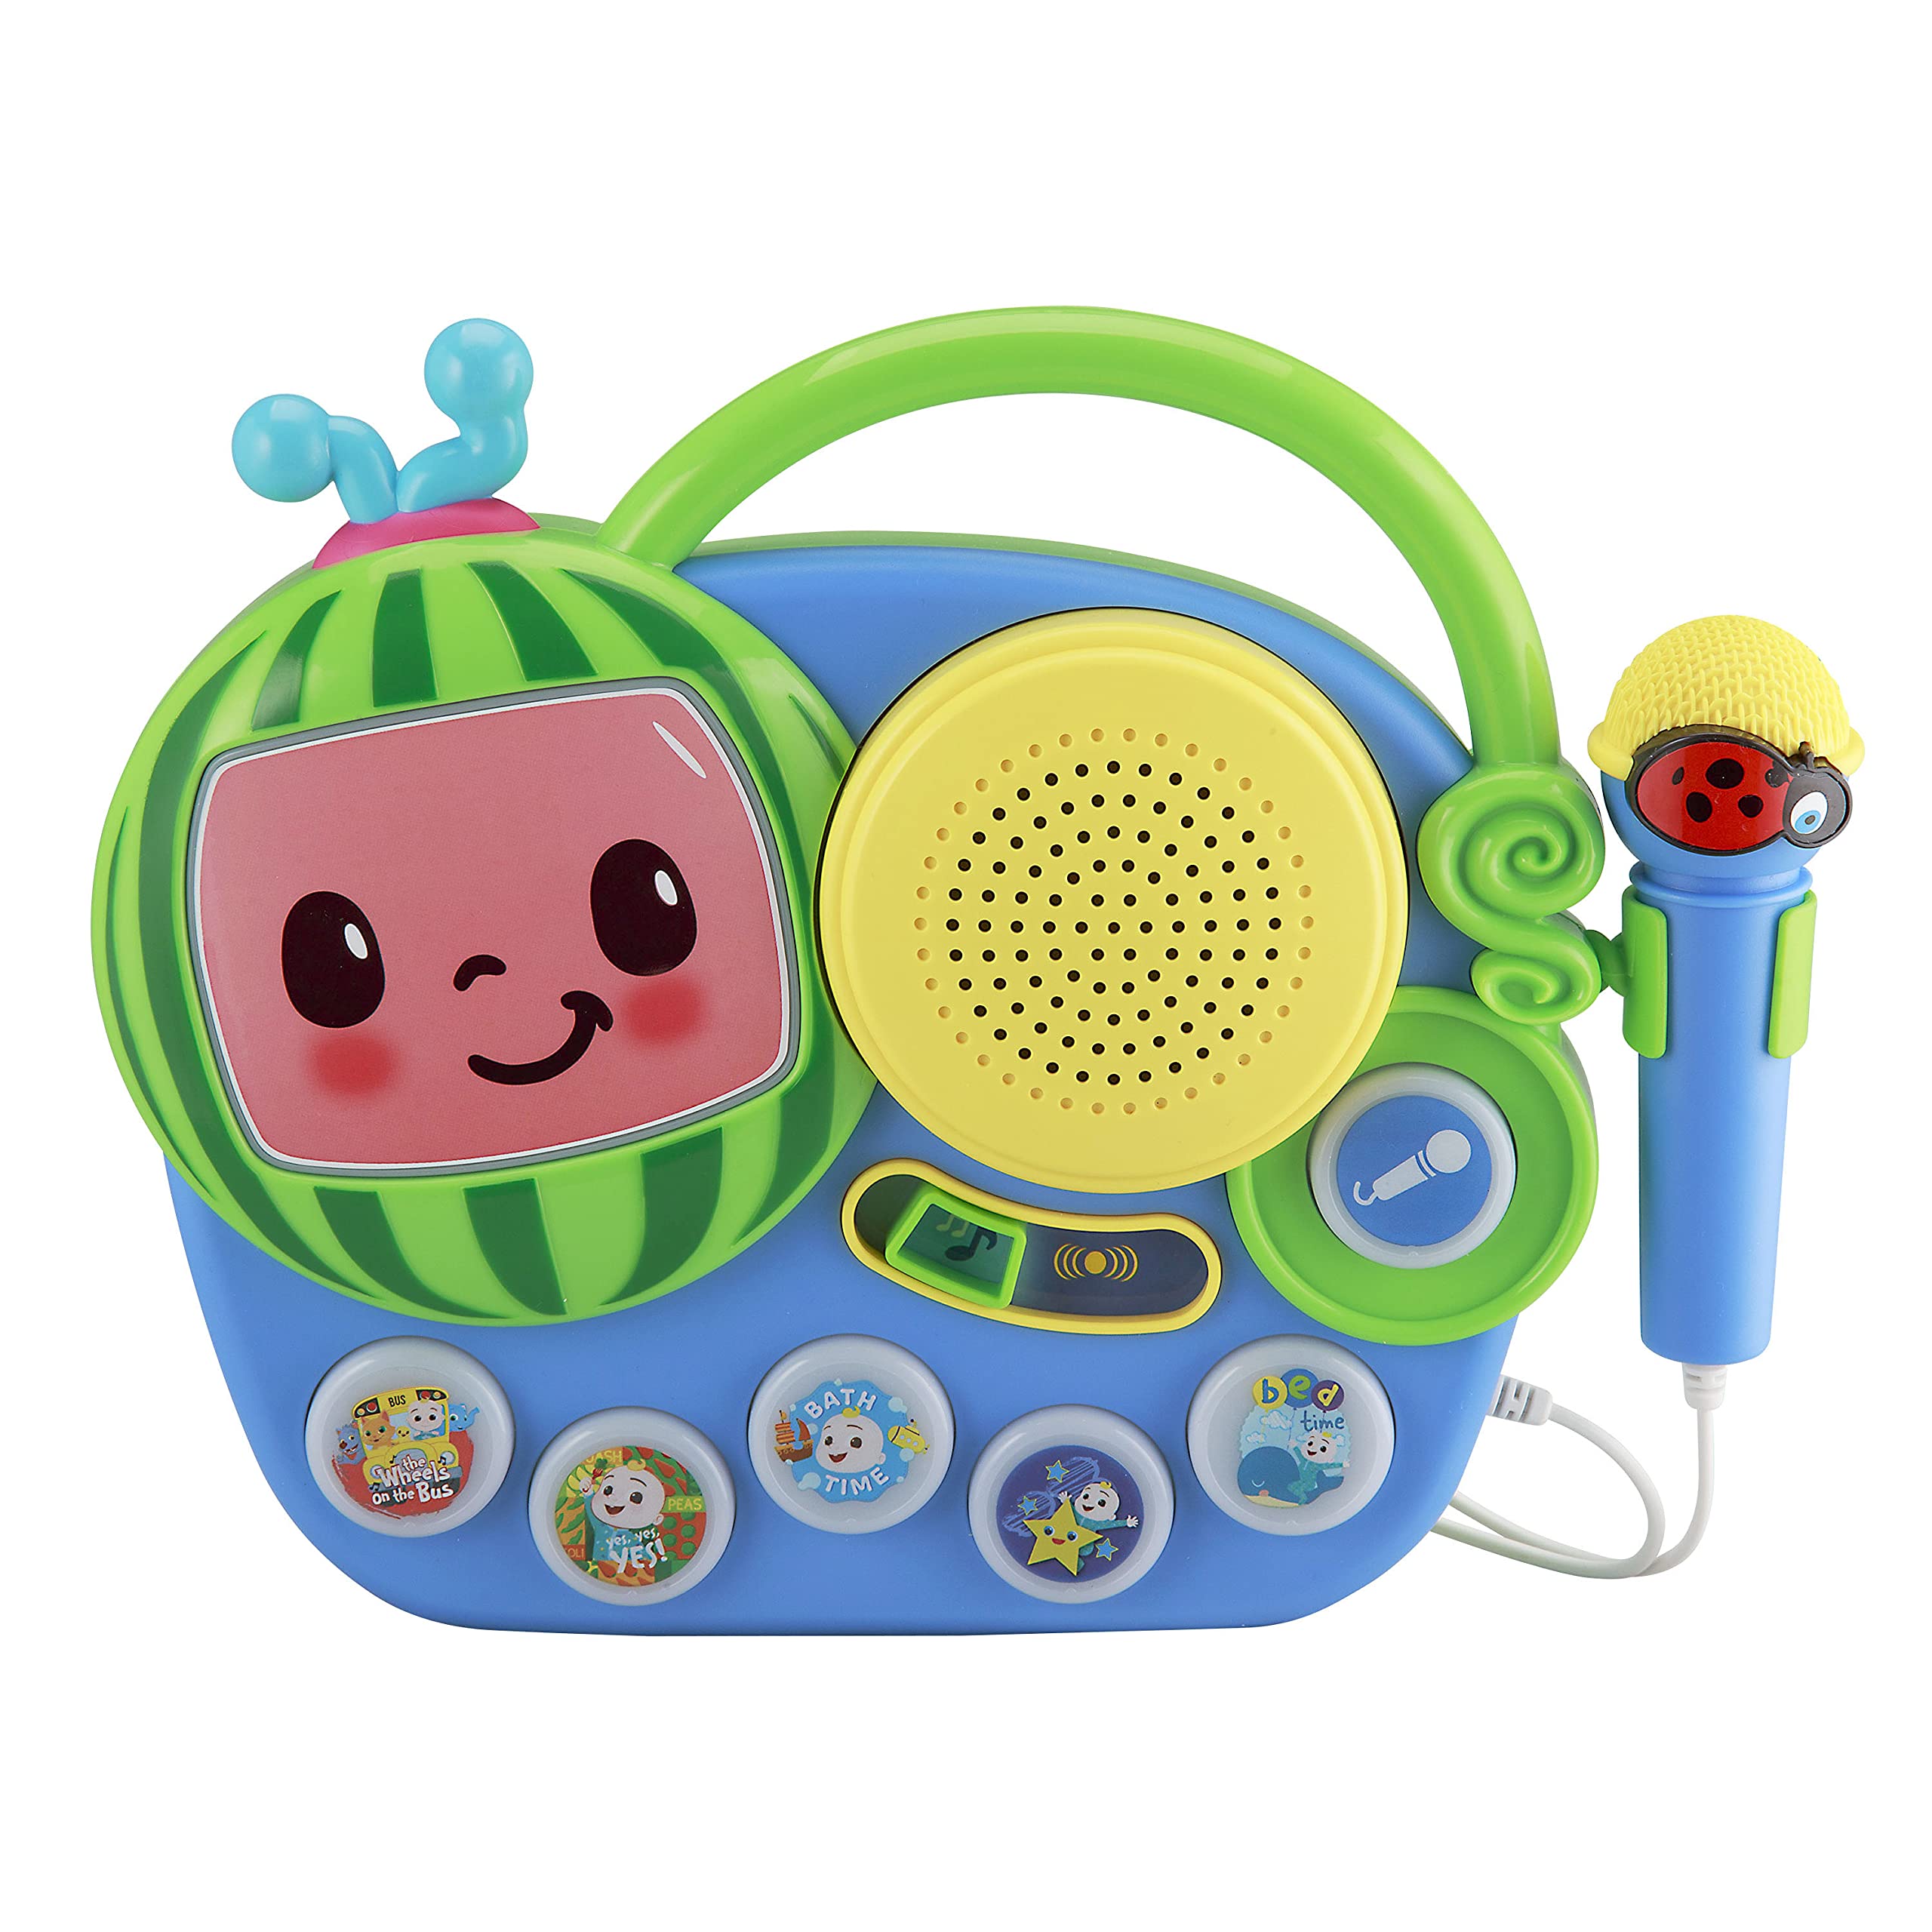 eKids Auxiliary Cocomelon Toy Singalong Boombox with Microphone for Toddlers, Built-in Music and Flashing Lights, Fans of Cocomelon Gifts